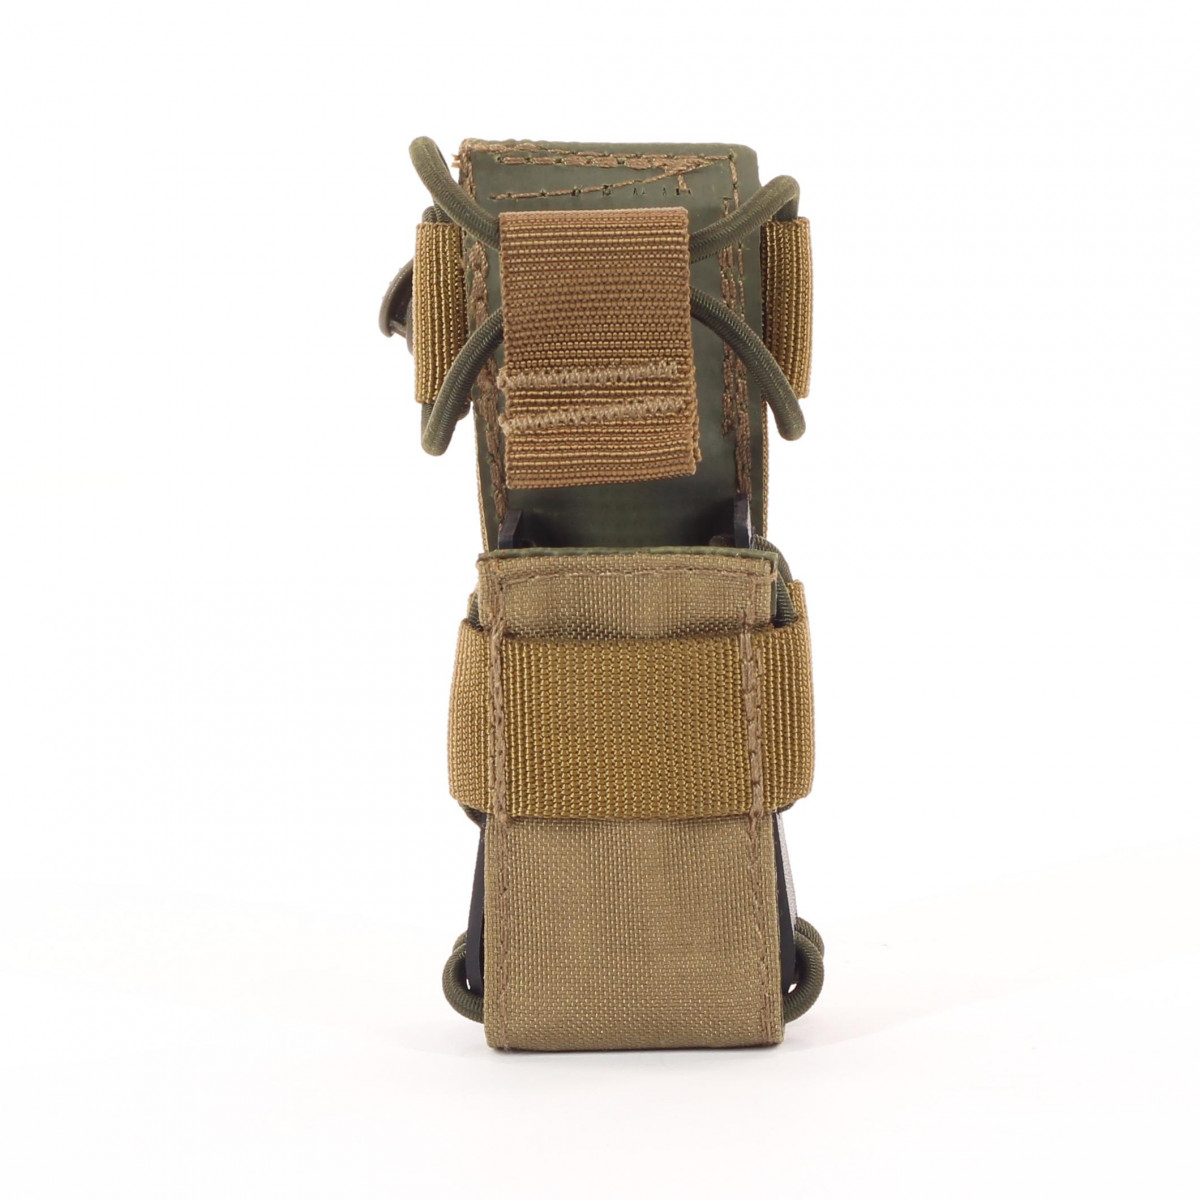 Universal-Lampenholster und Magazintasche MOLLE-System in Coyote